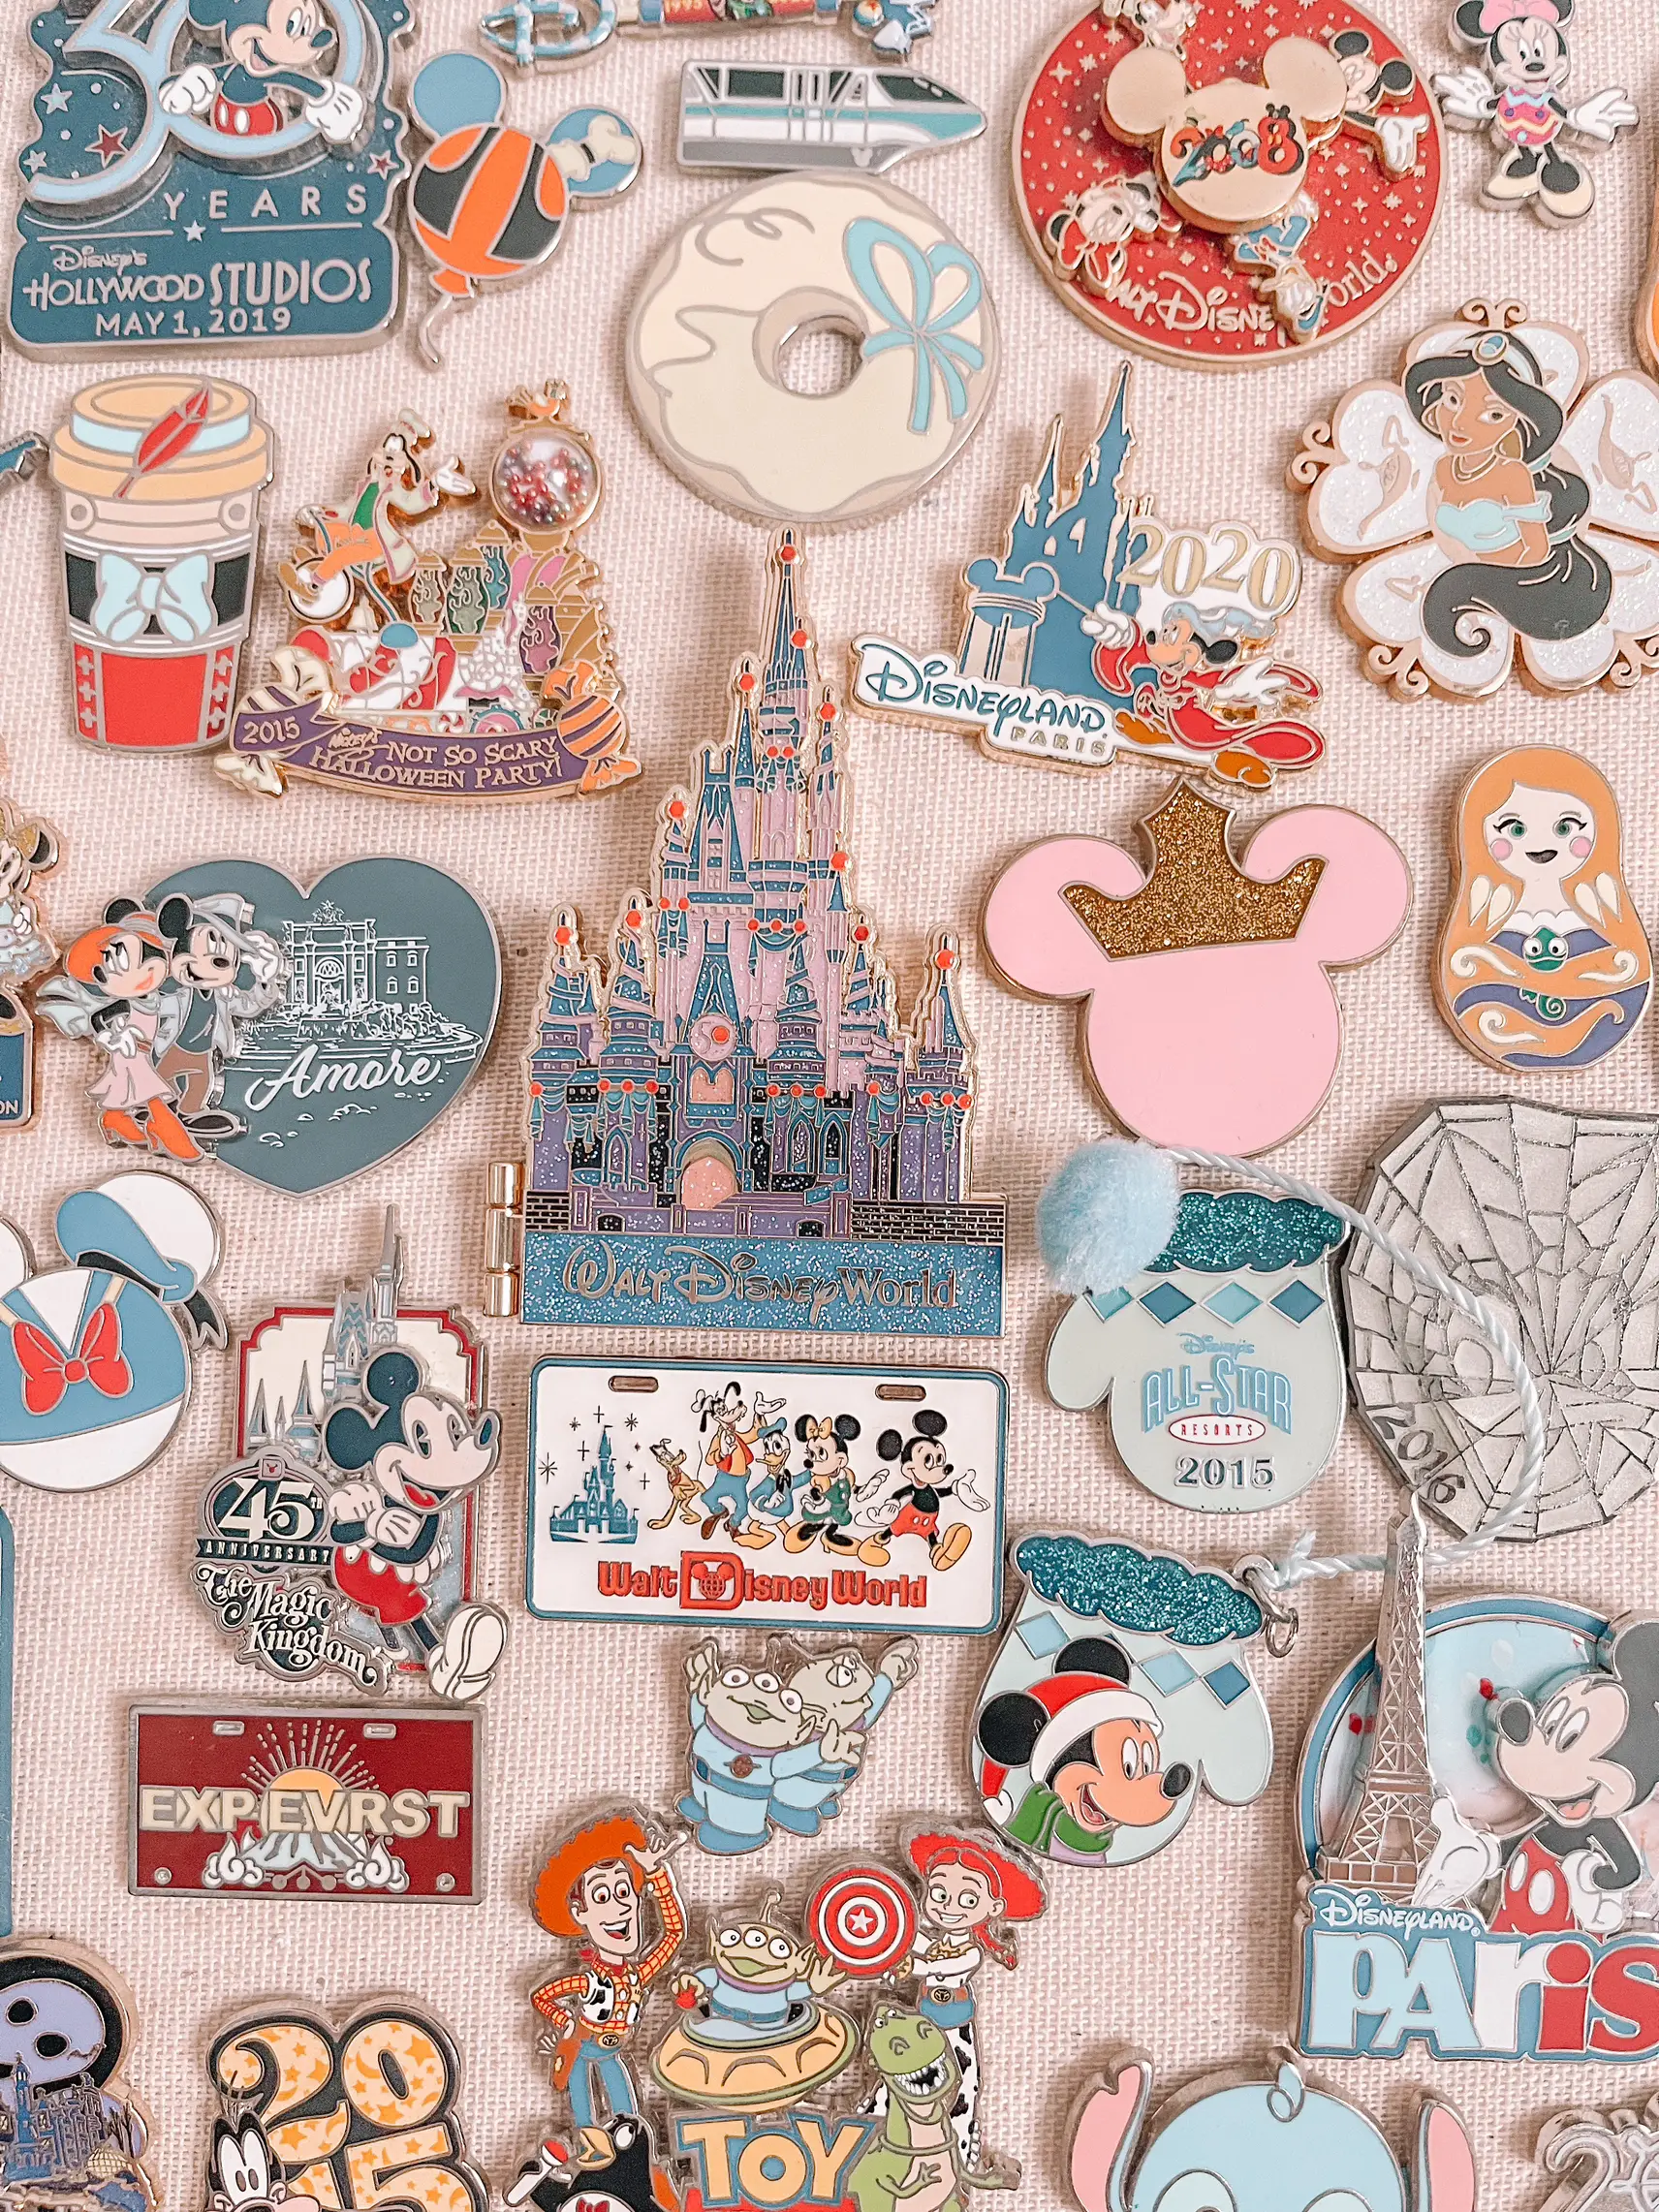 Disney Pin Trading: Tips and Tricks - The Sweeter Side of Mommyhood